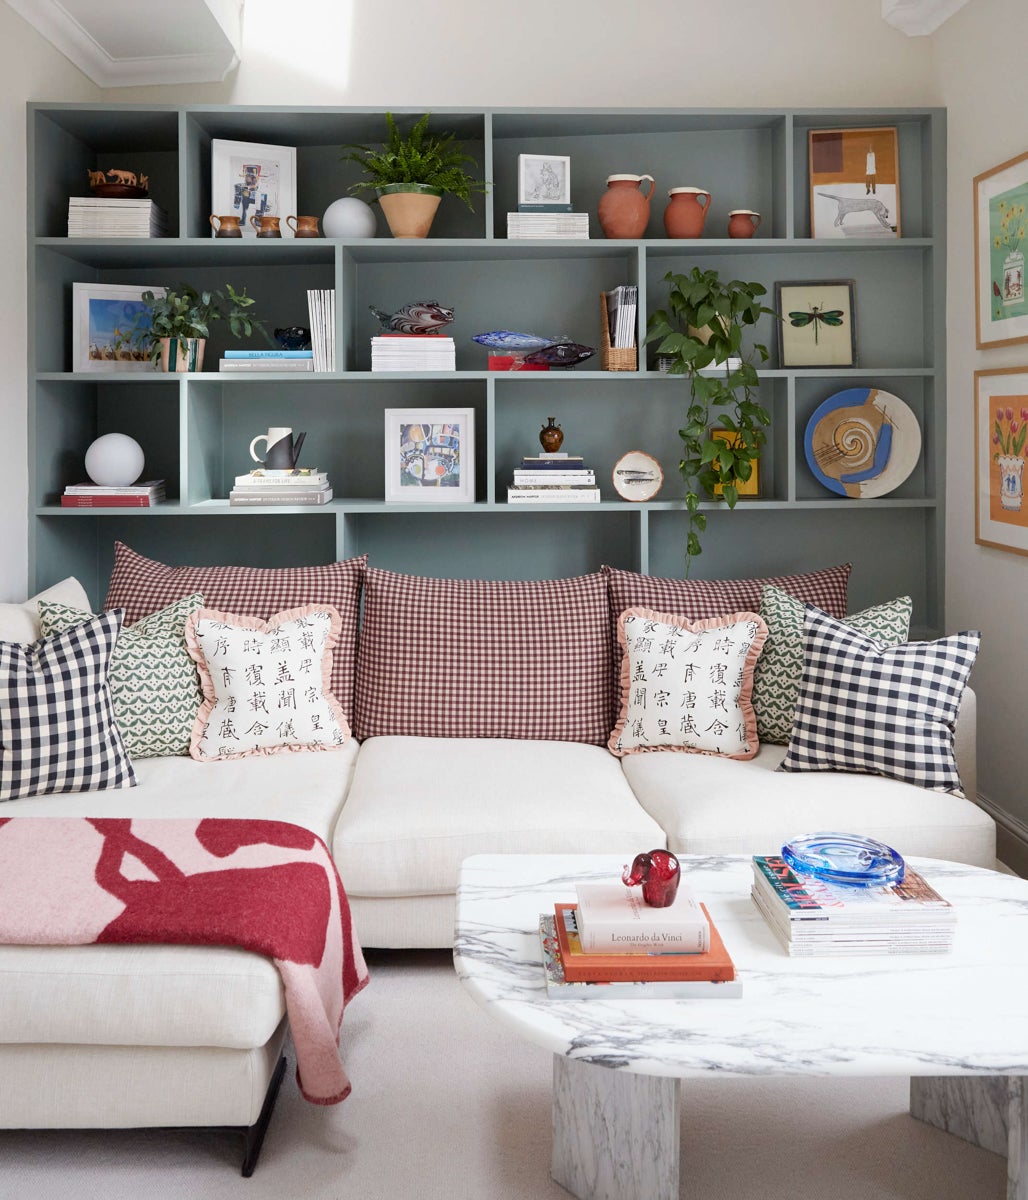 This London Designer Was in No Rush to Decorate, But the Lack of Storage Couldn’t Be Ignored